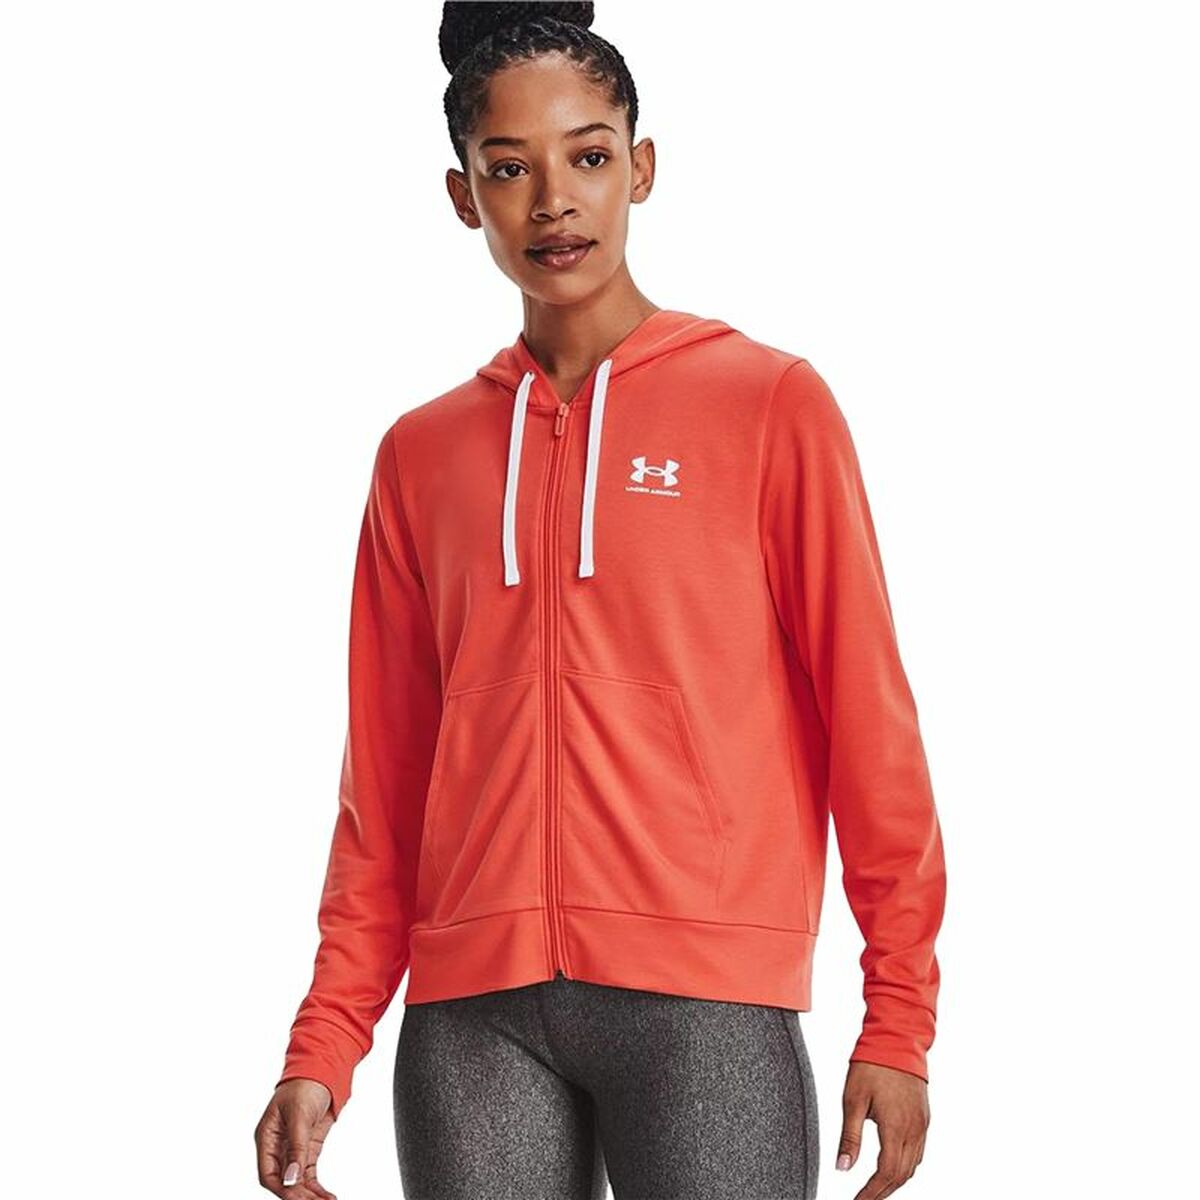 Women’s Zipped Hoodie Under Armour Rival Terry